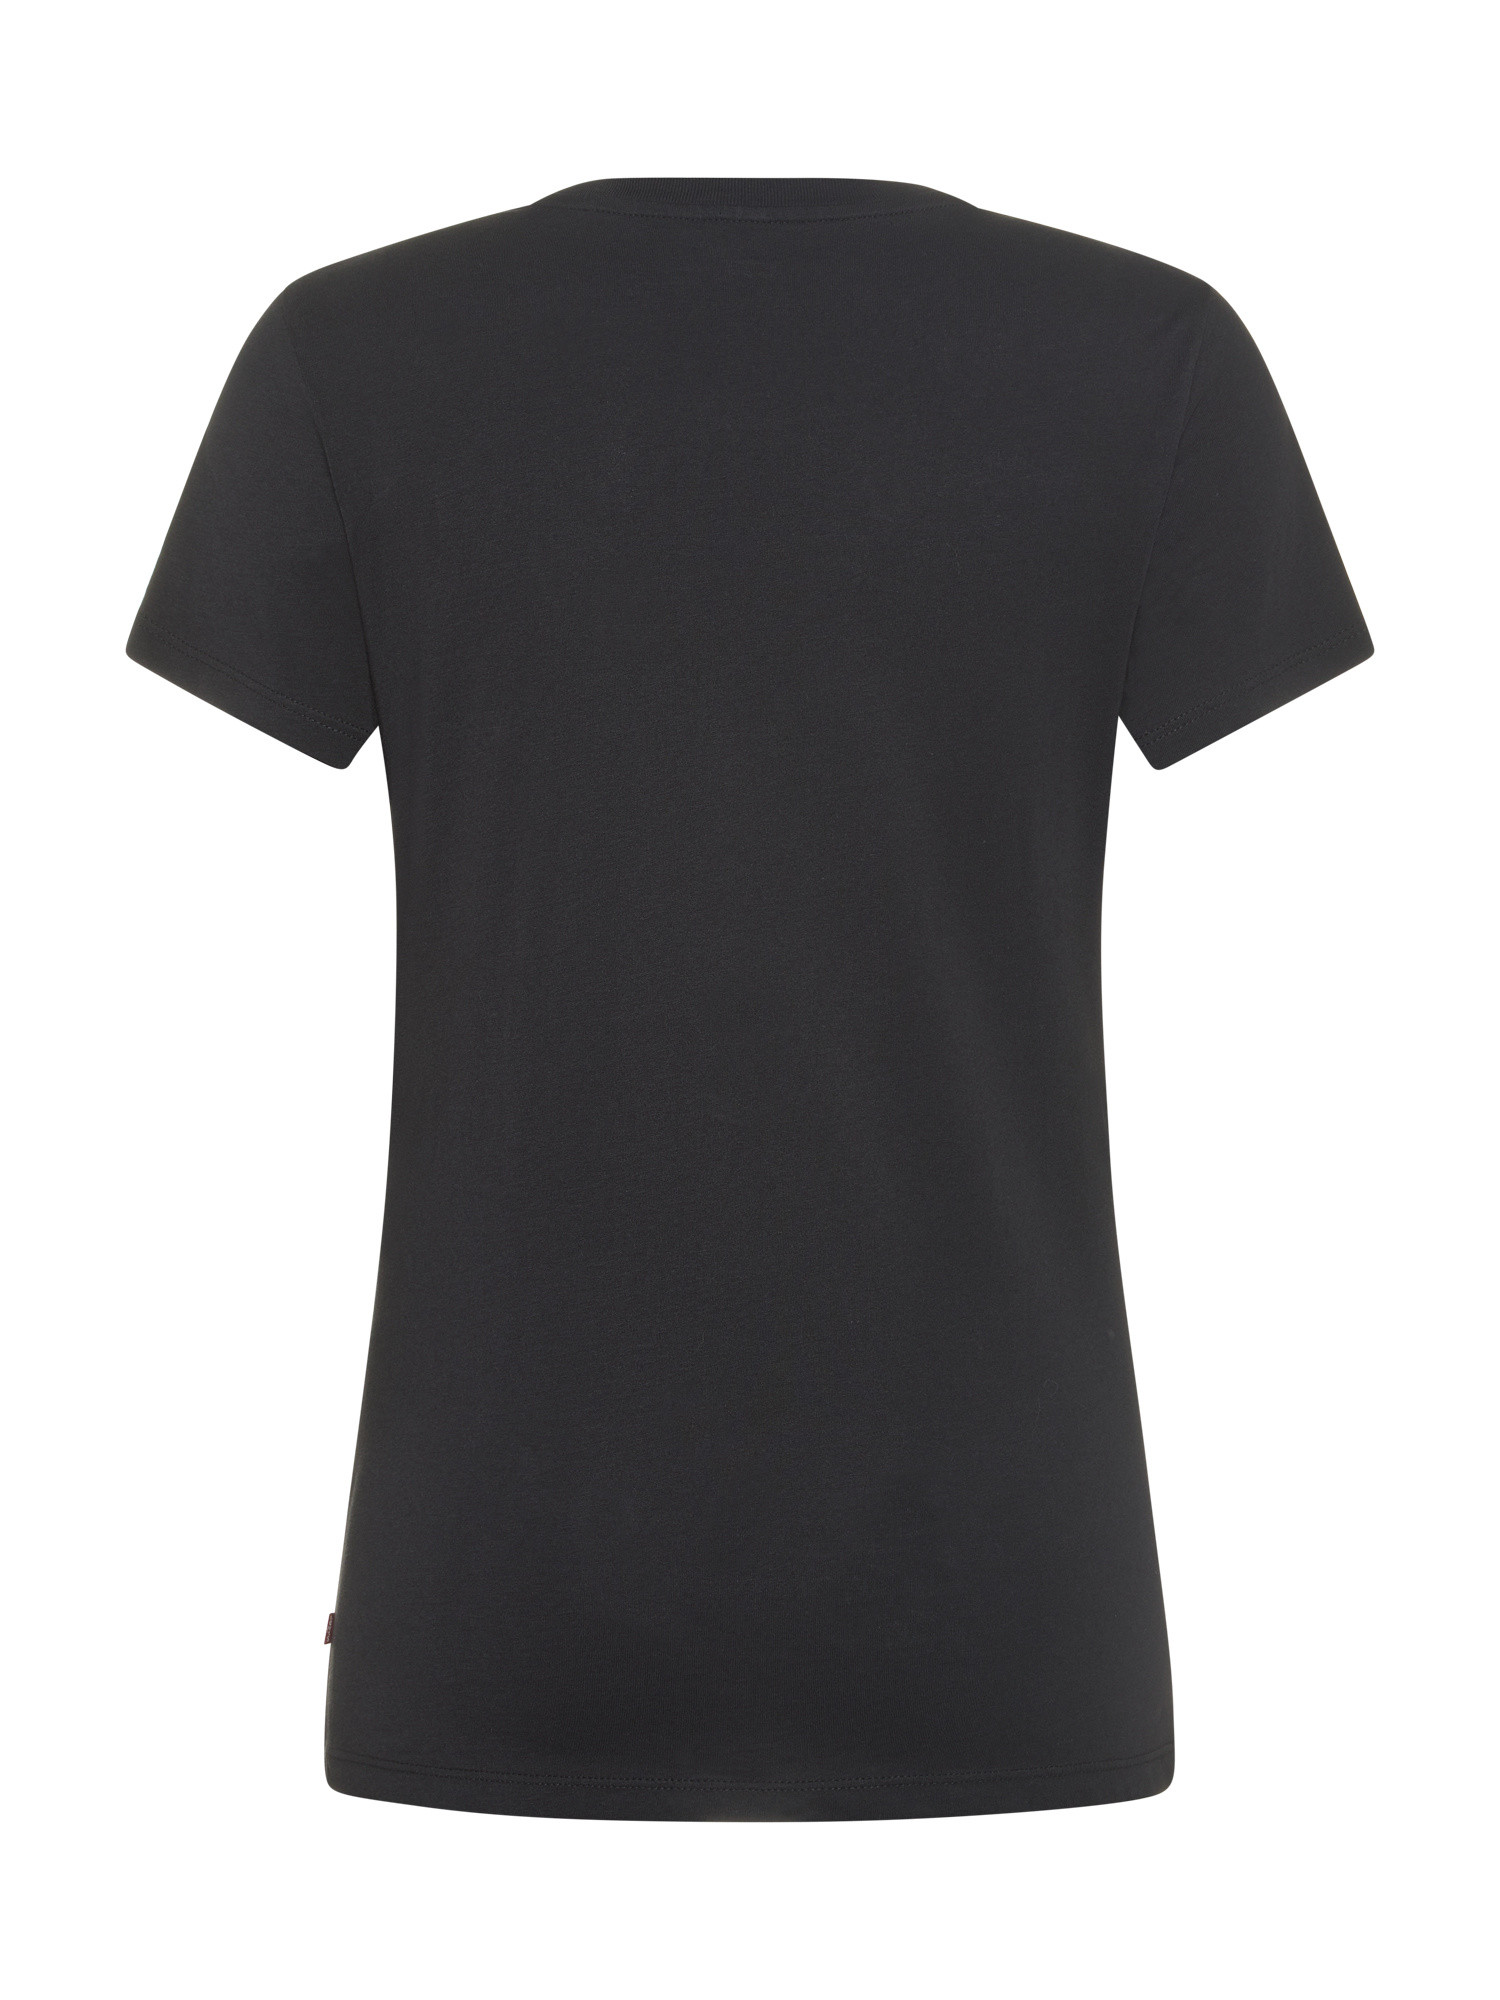 Levi's - T-shirt in cotone con stampa logo, Nero, large image number 1